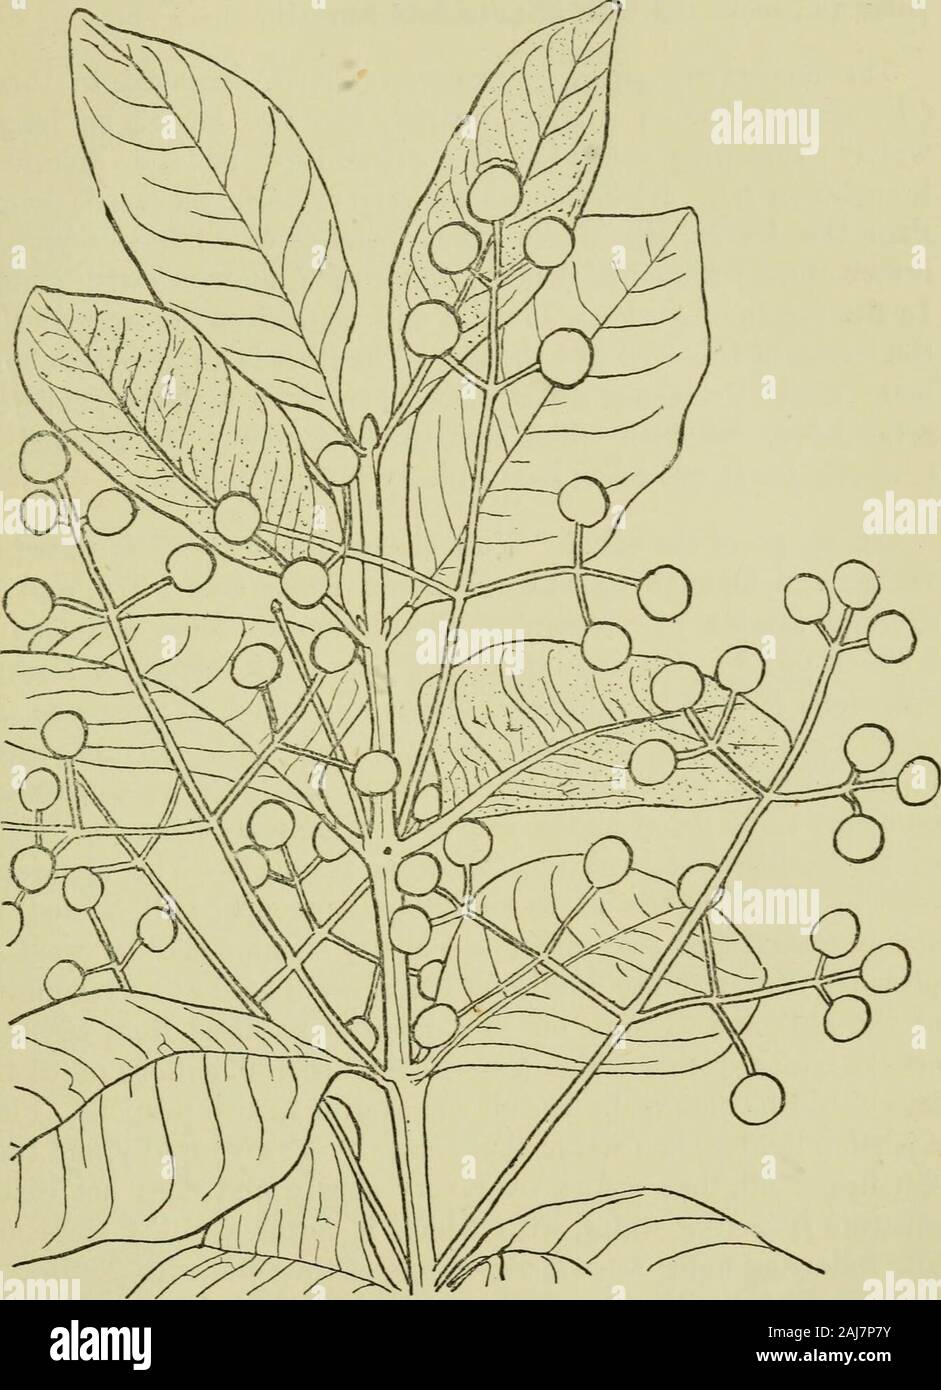 Odorographia : a natural history of raw materials and drugs used in the perfume industry : intended to serve growers, manufacturers and consumers . e statement, thespecies, varieties and forms of Myrcia and Eugenia being sonumerous and so nearly allied that it is probable that the leavescommercially known as Bay leaves are gathered from varioustrees, and no attention is paid by the gatherers to the slightstructural differences w^hich distinguish botanically between thevarious trees. Piecent opinion is in favour of these Bay-leavesbeing derived from Eugenia acris, Wight and Arnott {Pimentaacris Stock Photo